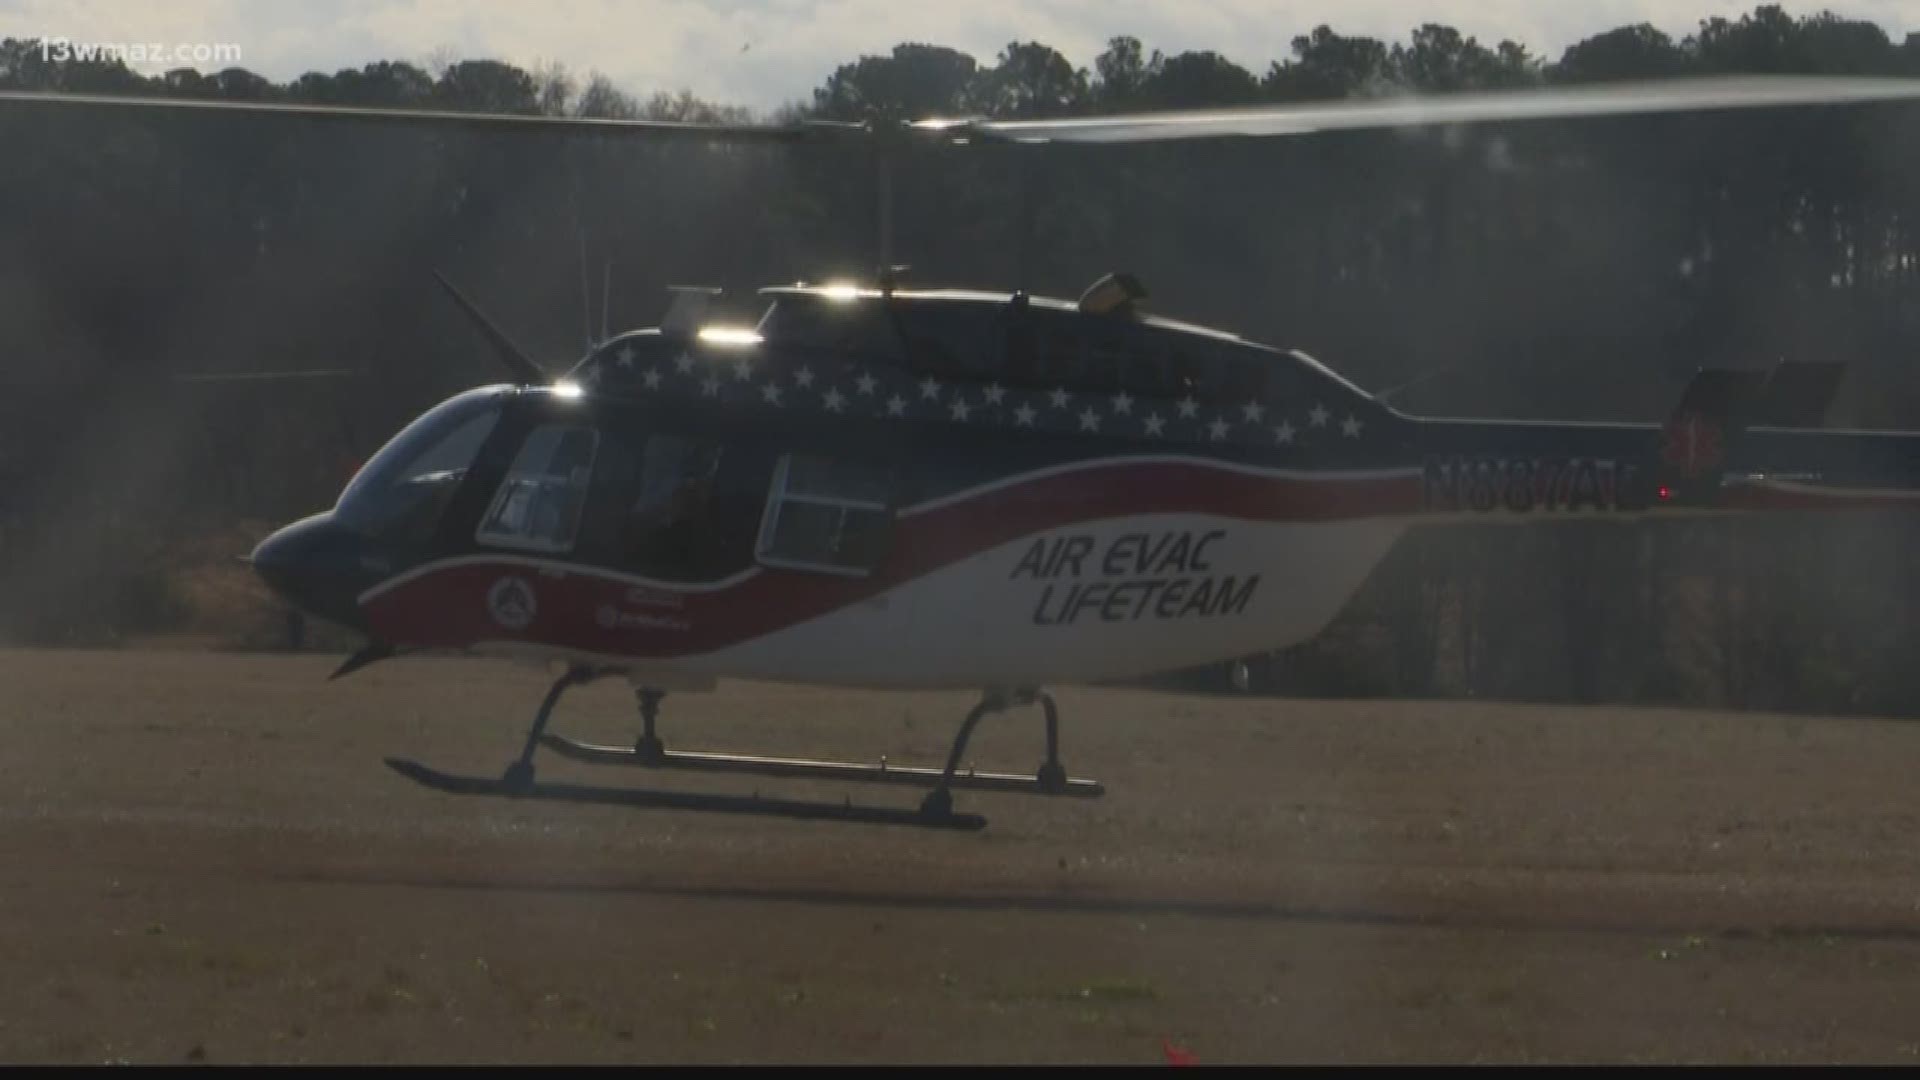 Medevac helicopter coming to Perry hospital